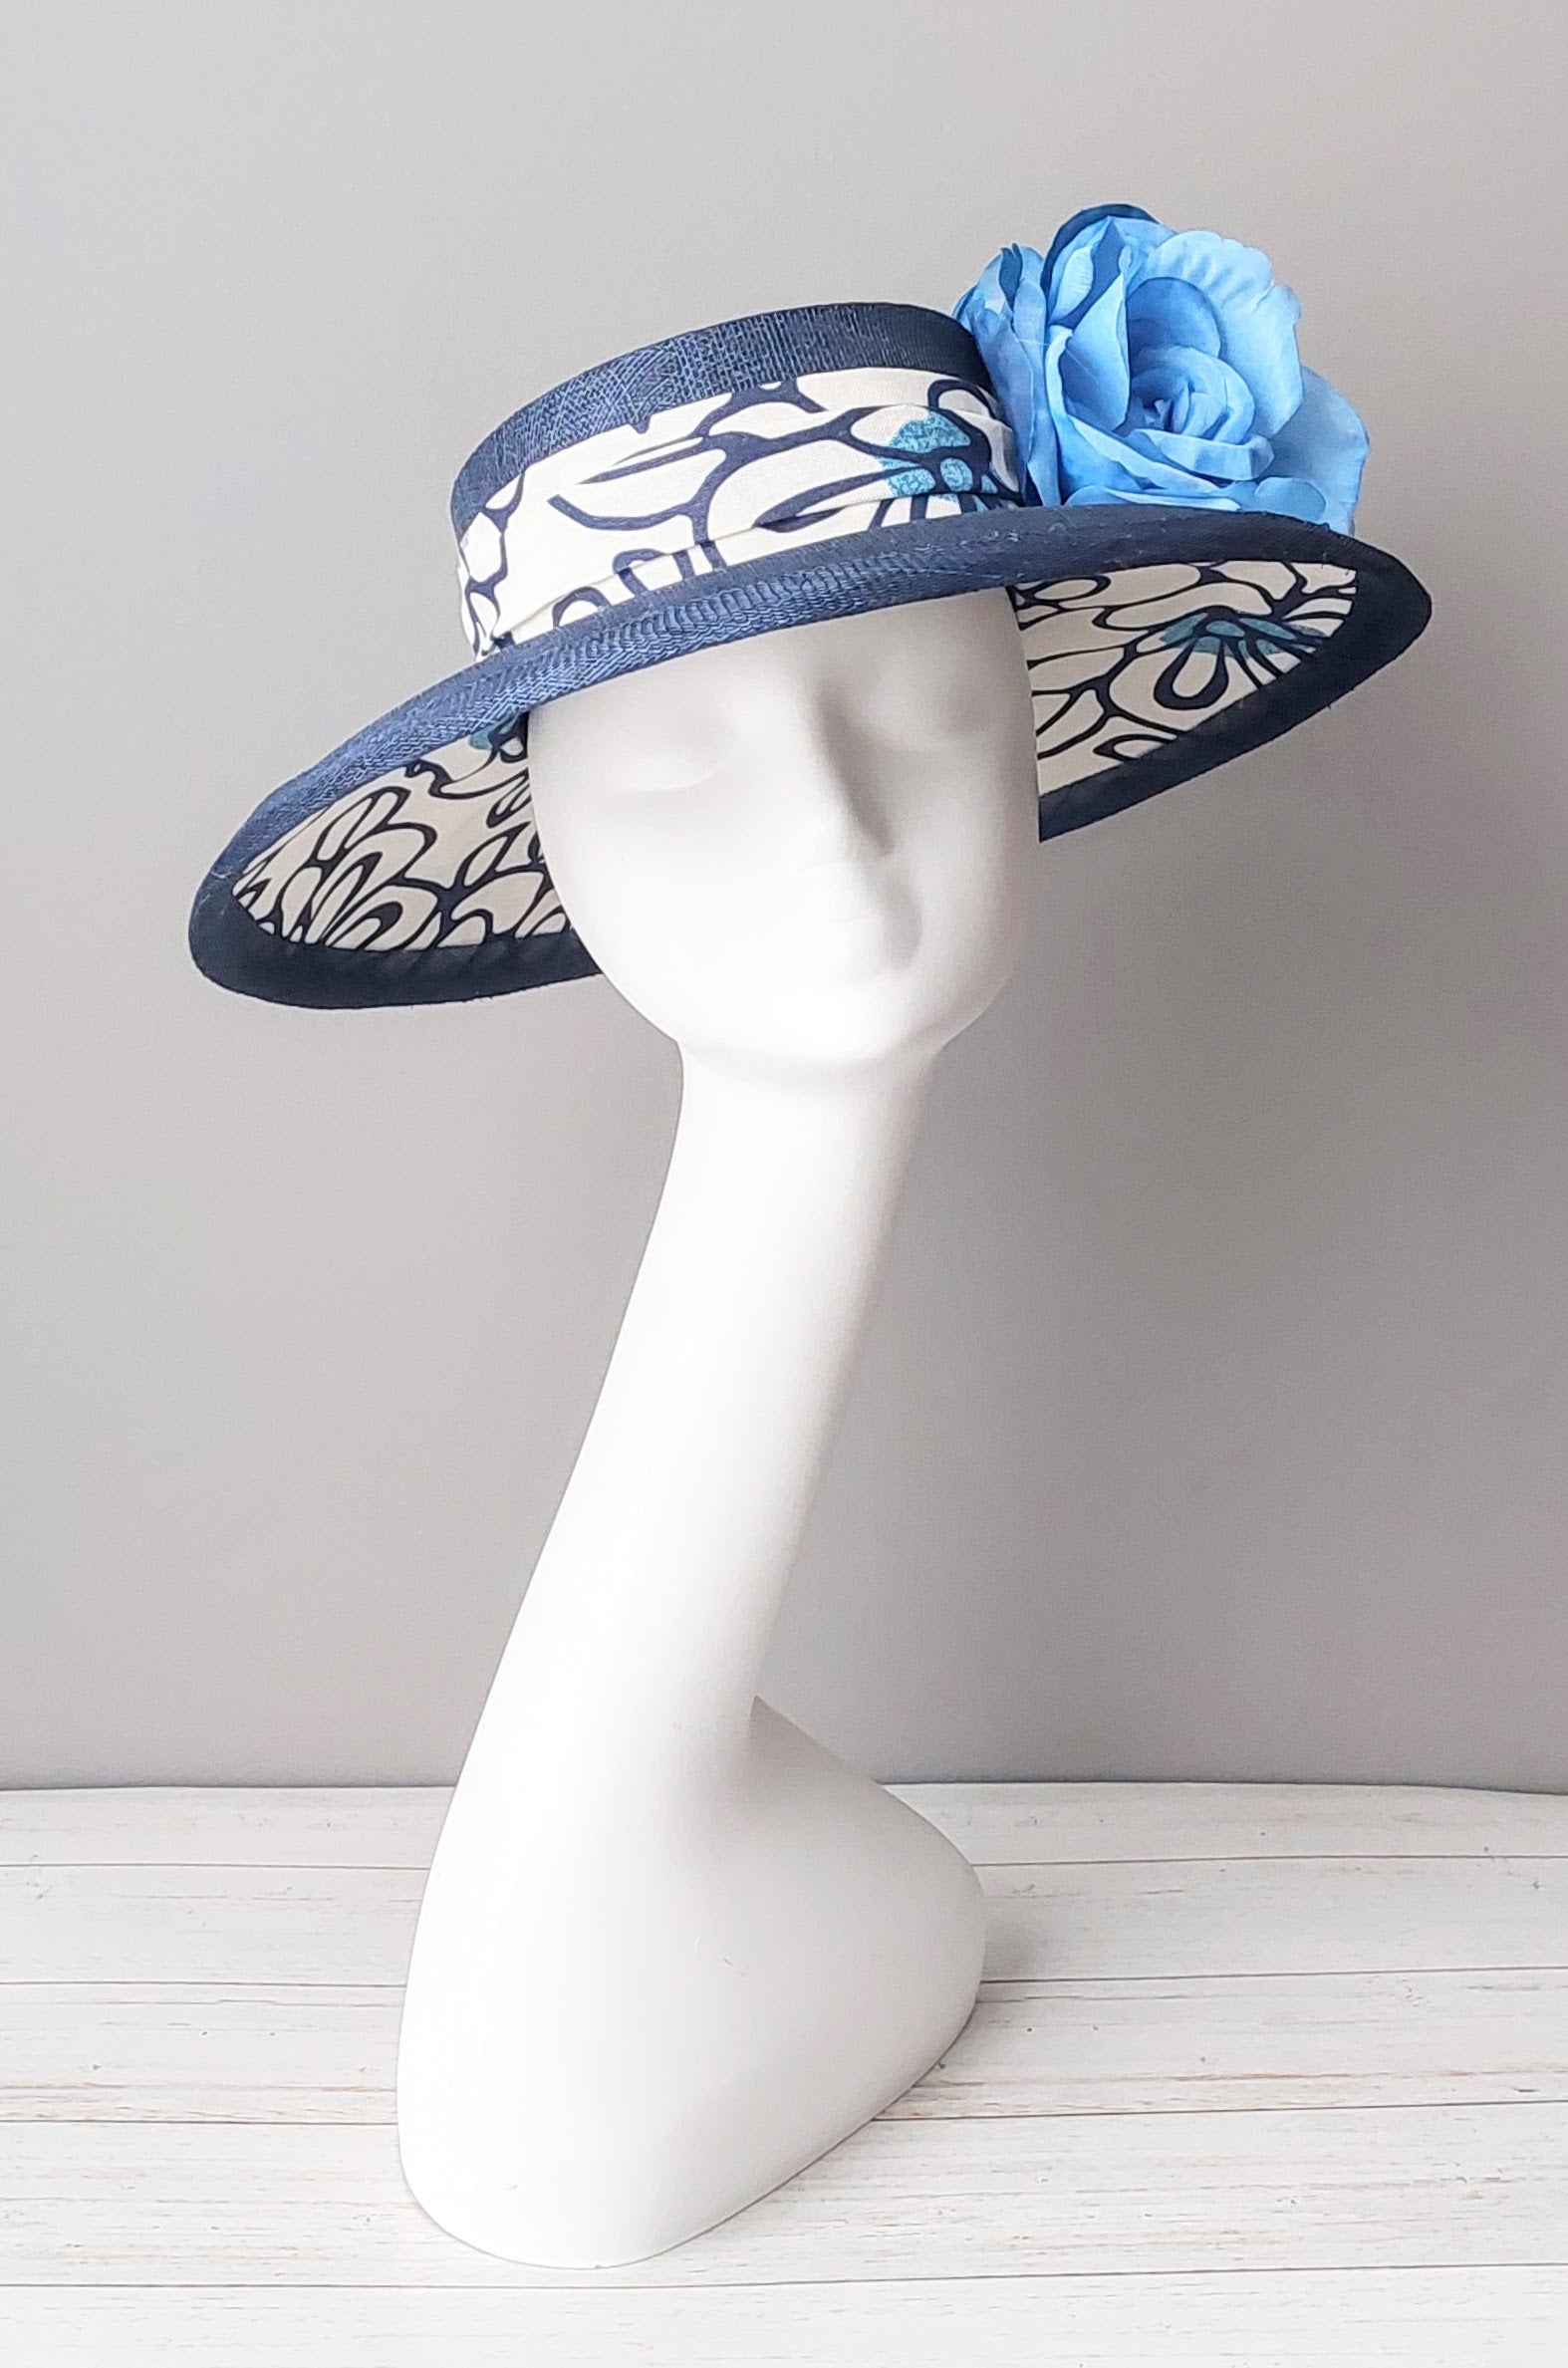 Hat Haven Millinery - the best Kentucky Derby hats and fascinators. Custom hats, dress hats, wedding hats, hat bands, hand made hats, bridal, milliner, hat store in Louisville.